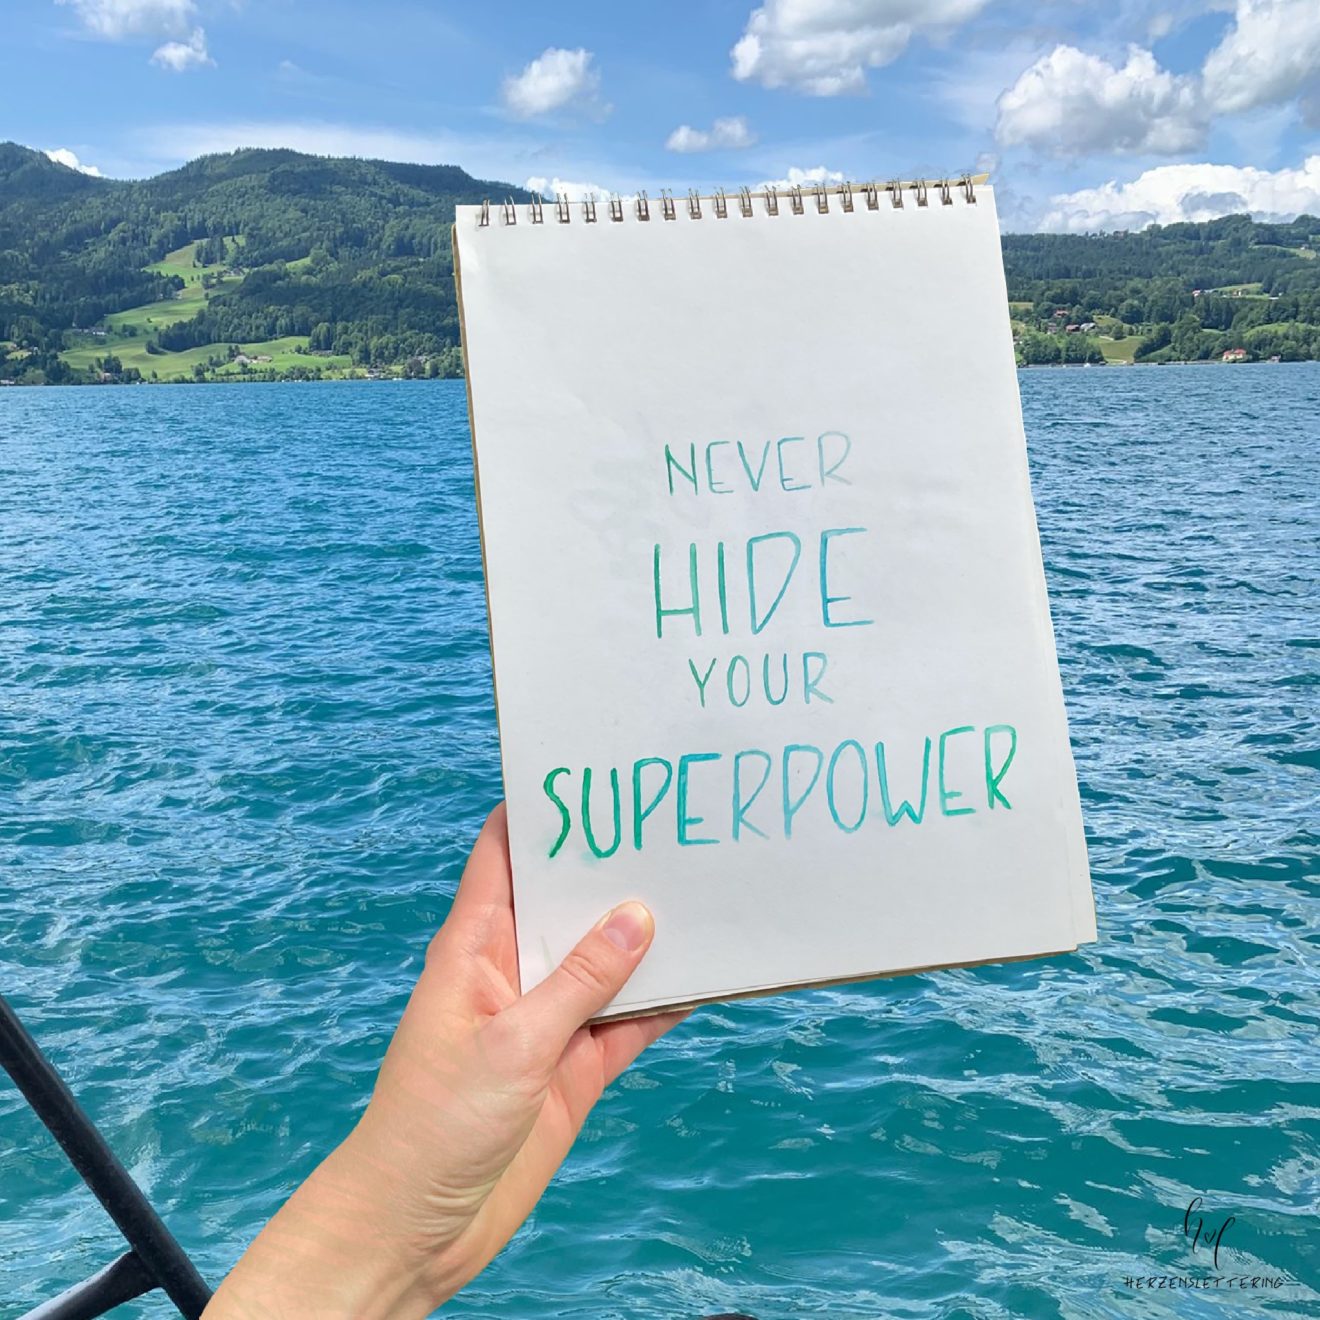 Never hide your superpower